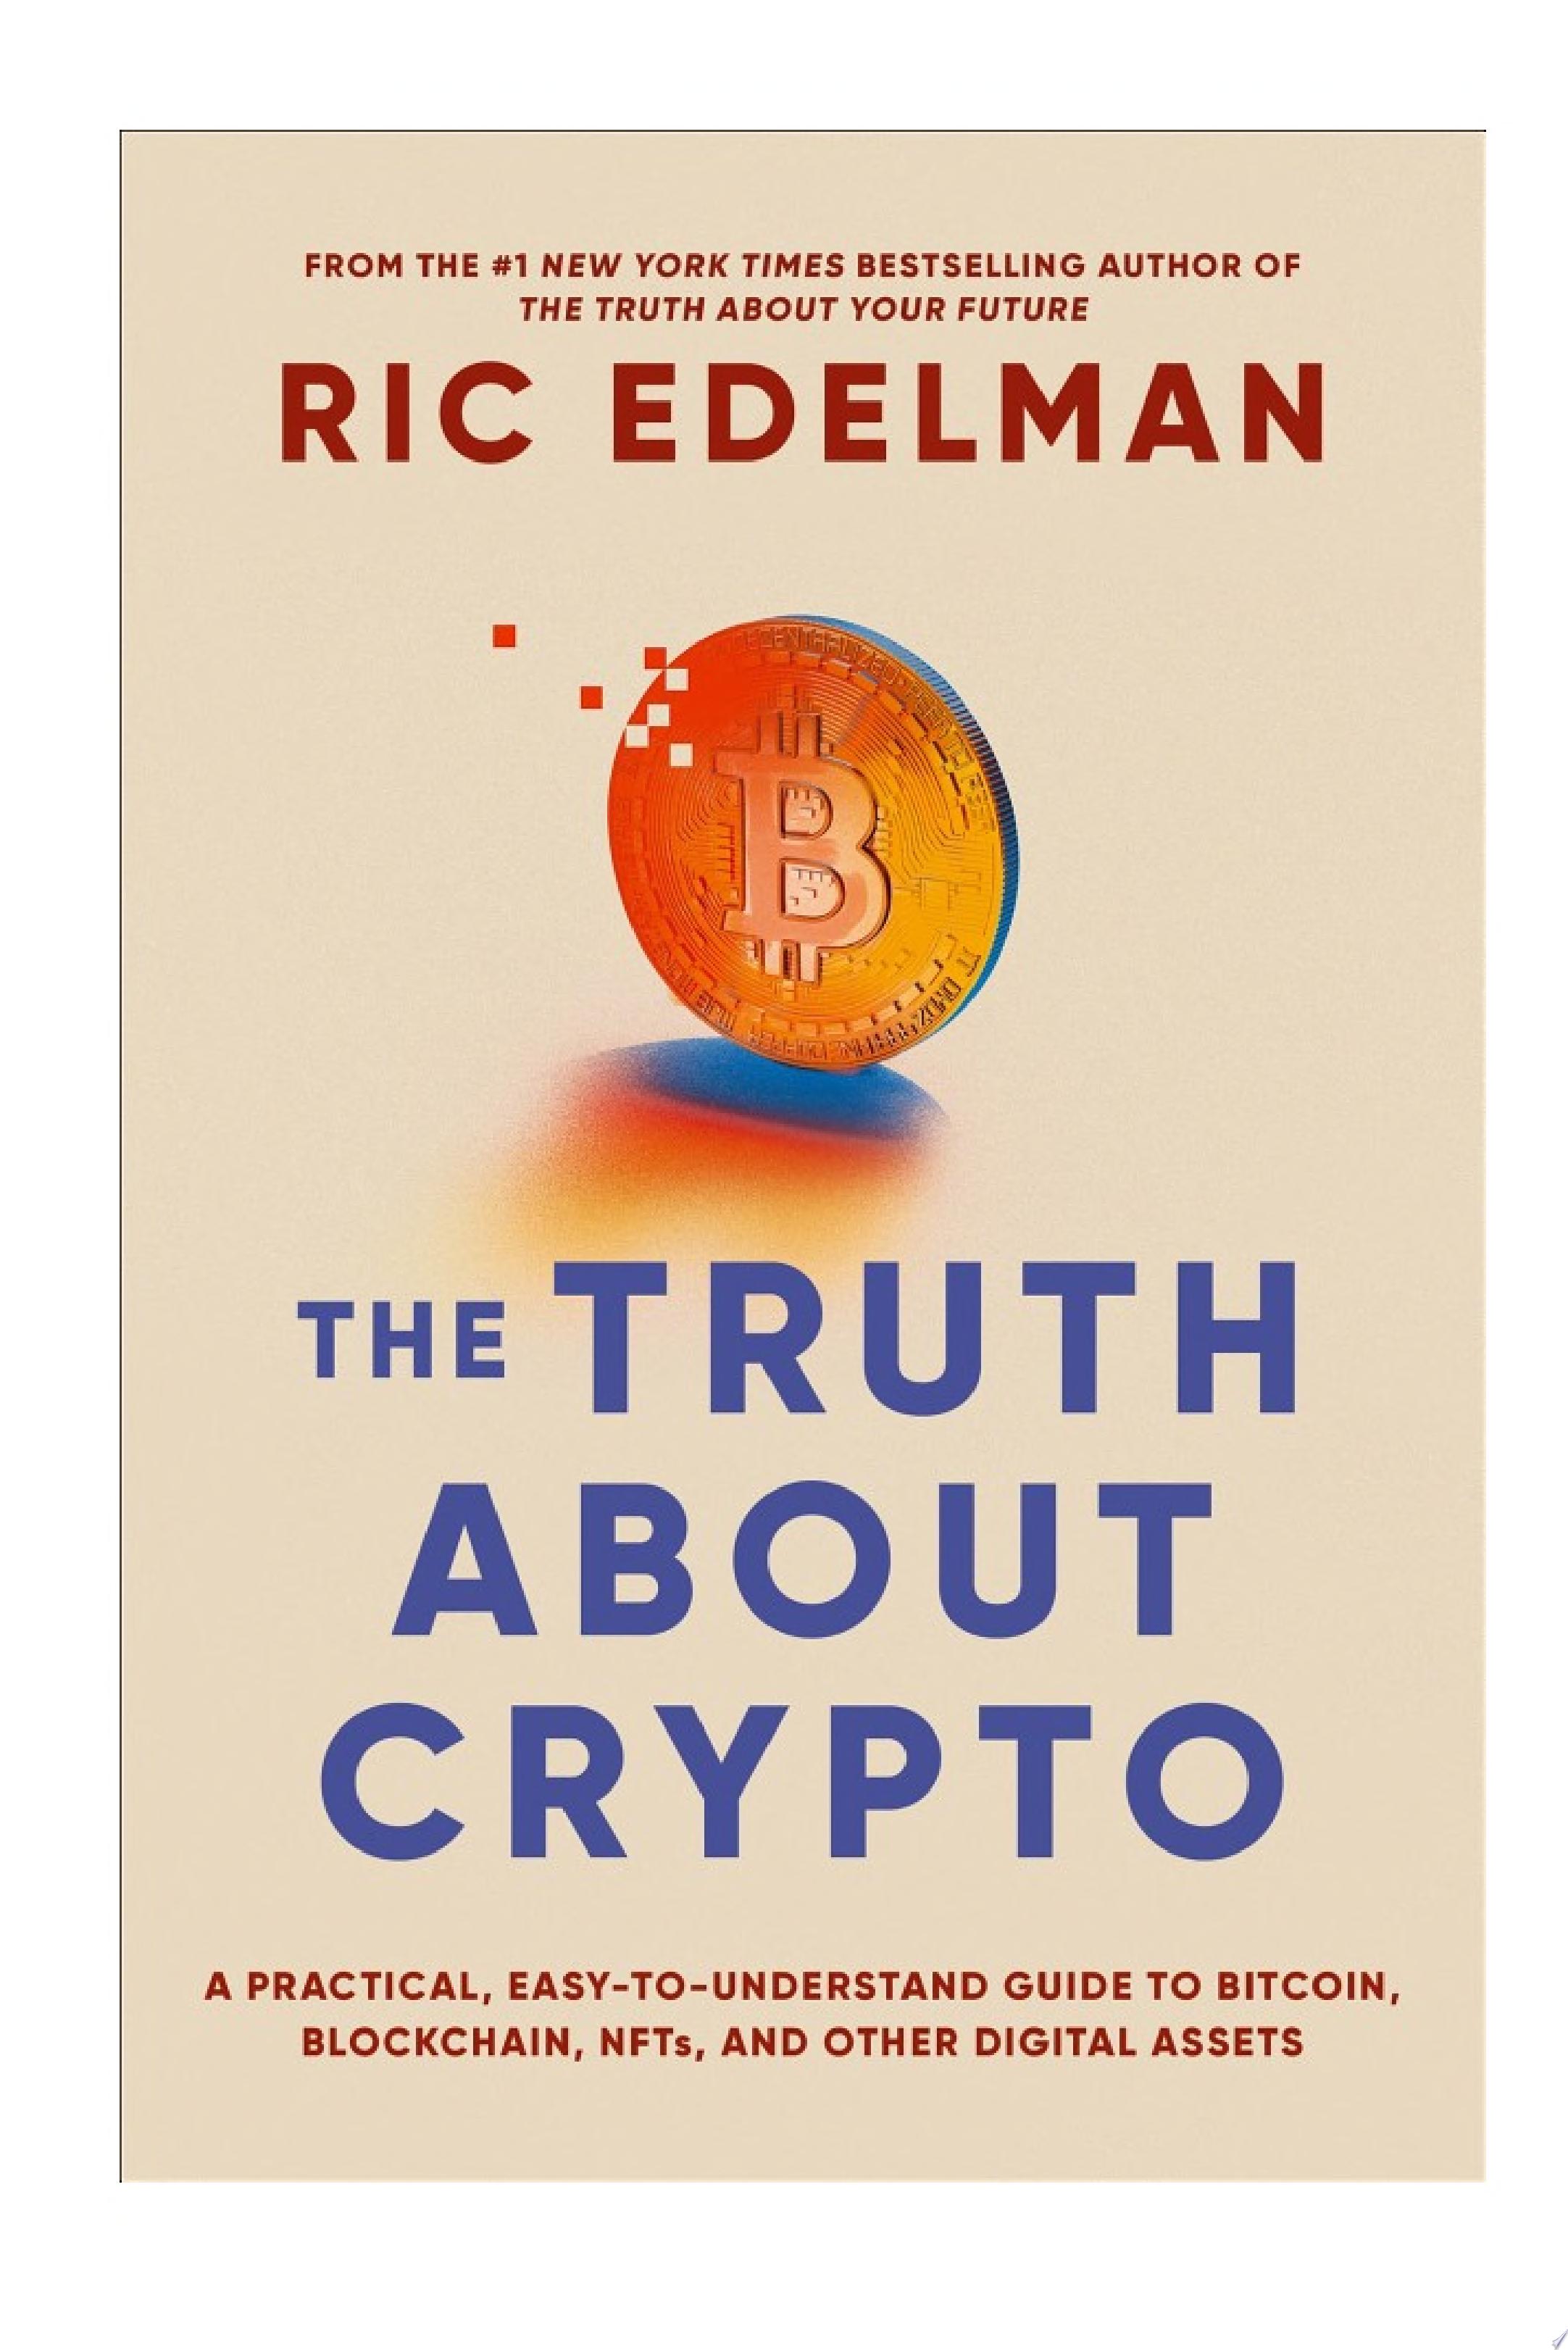 Image for "The Truth About Crypto"